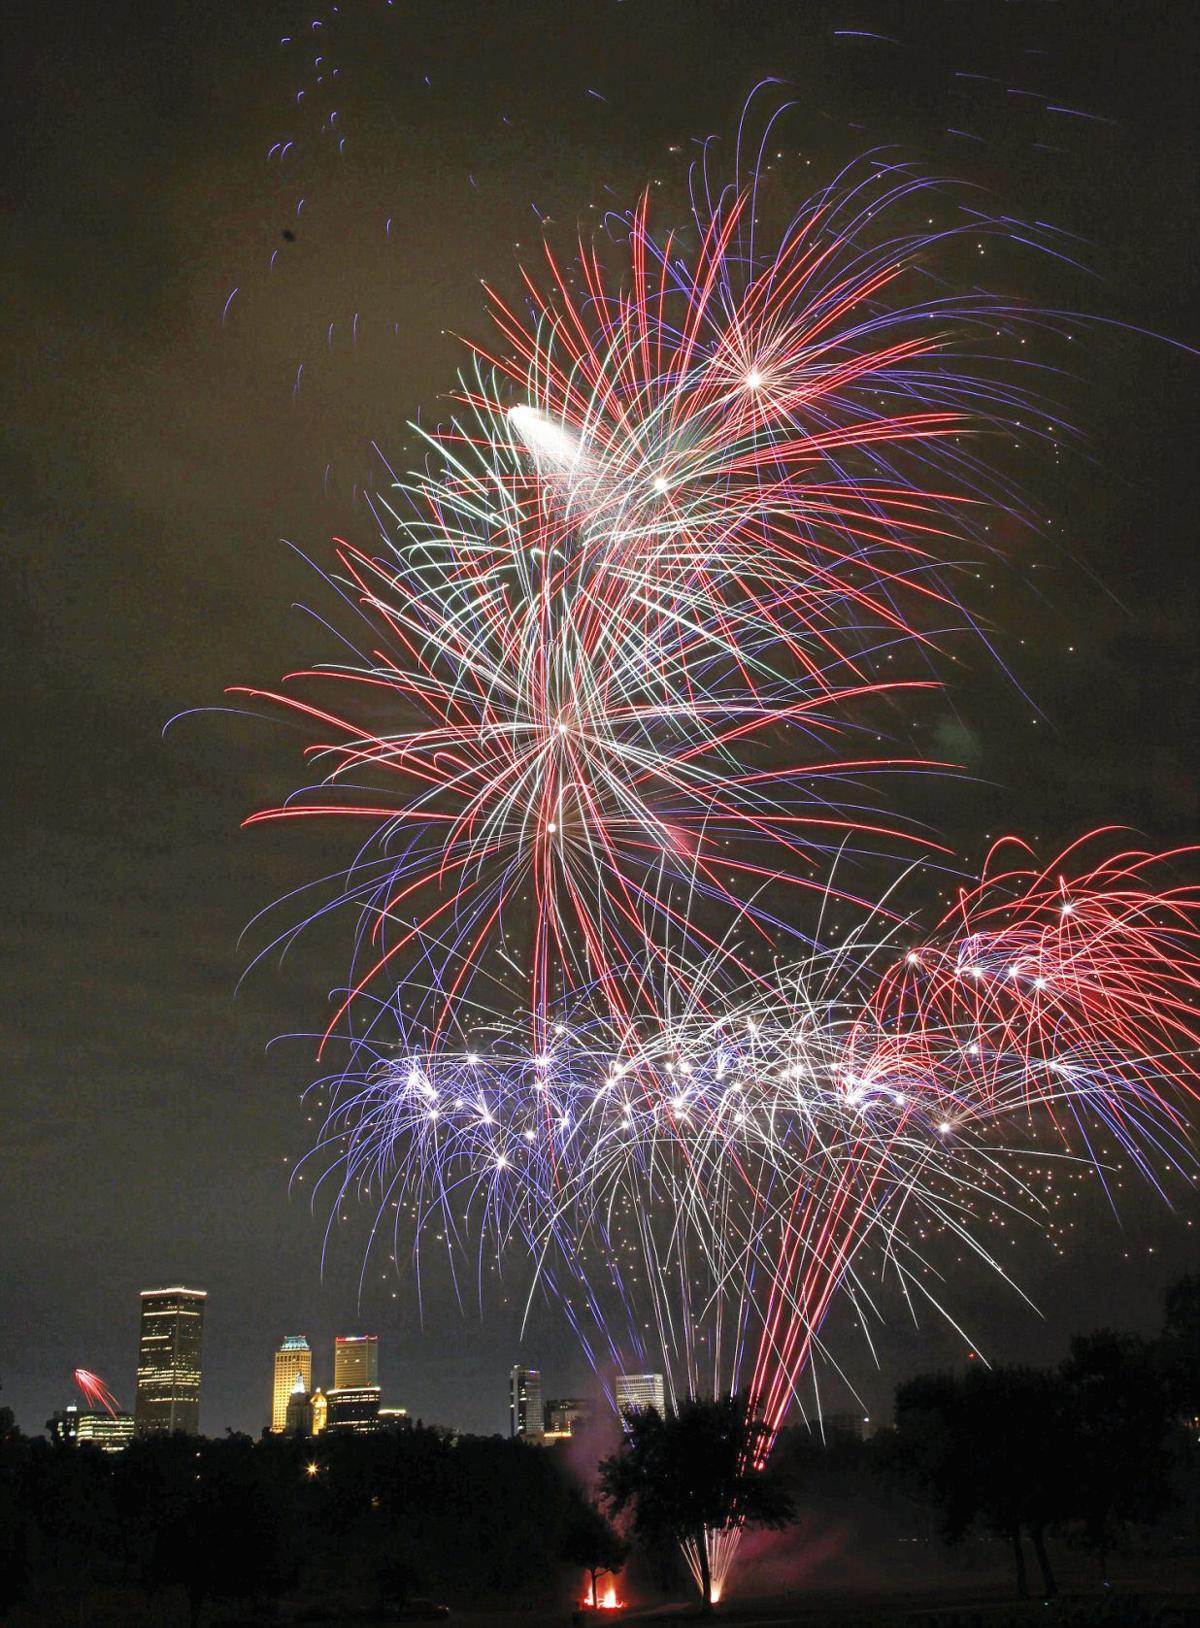 Gallery Get ready for the Fourth of July with these fireworks photos